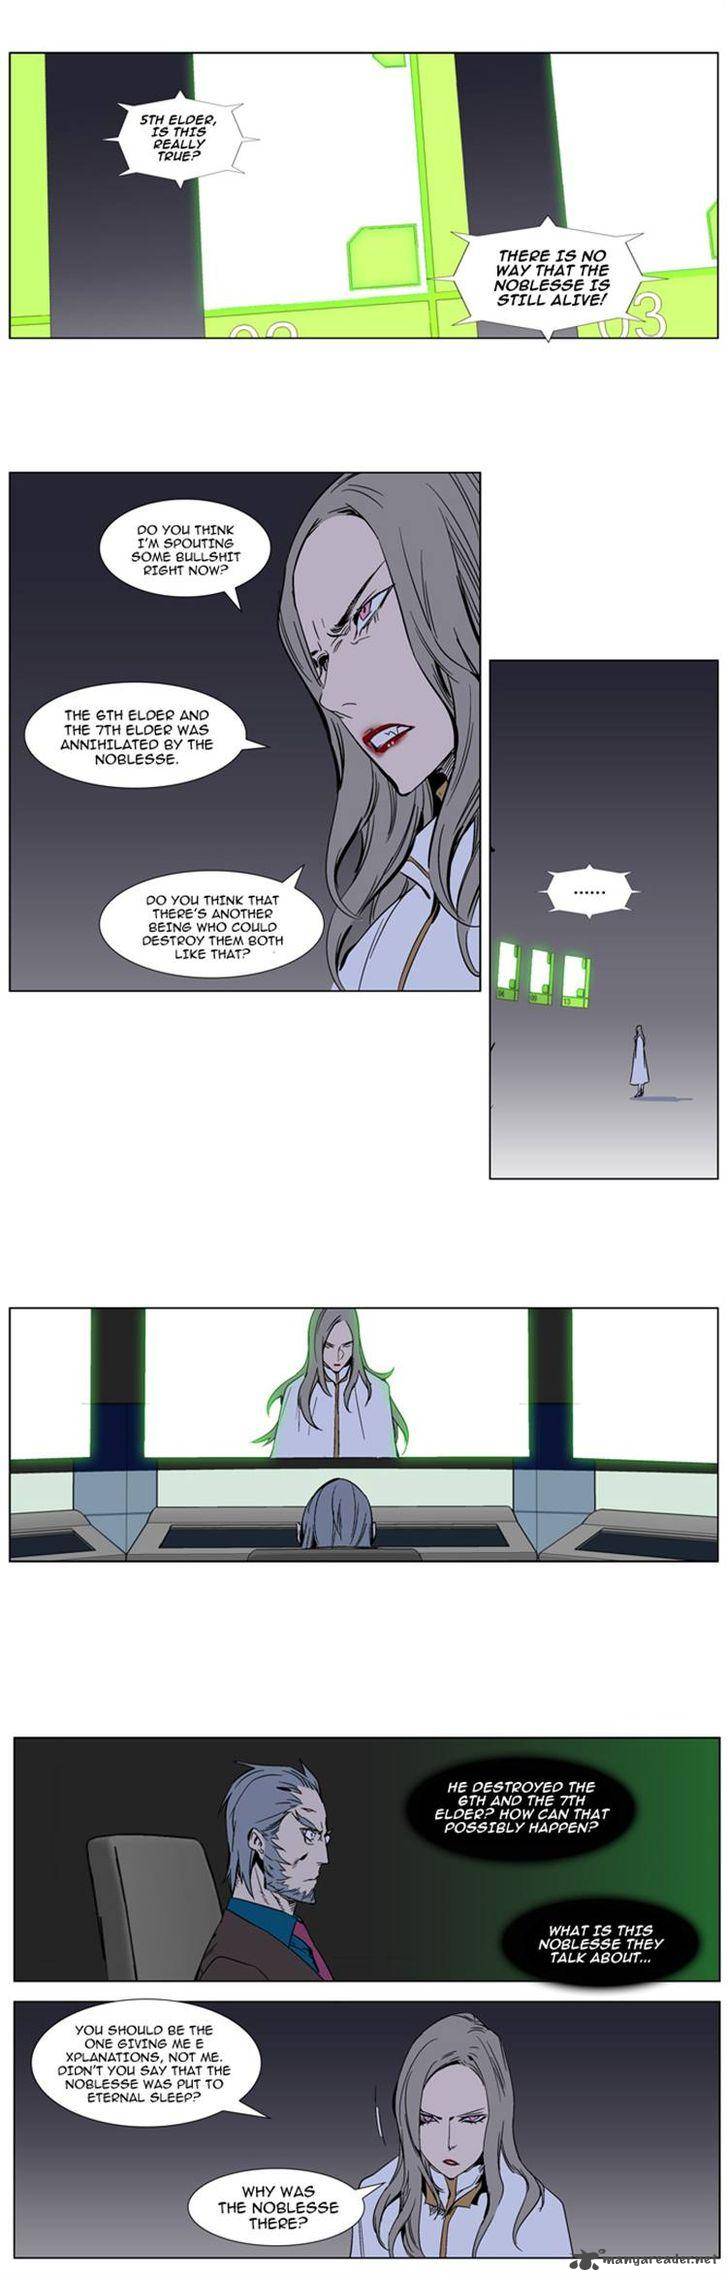 Noblesse Chapter 282 Page 4